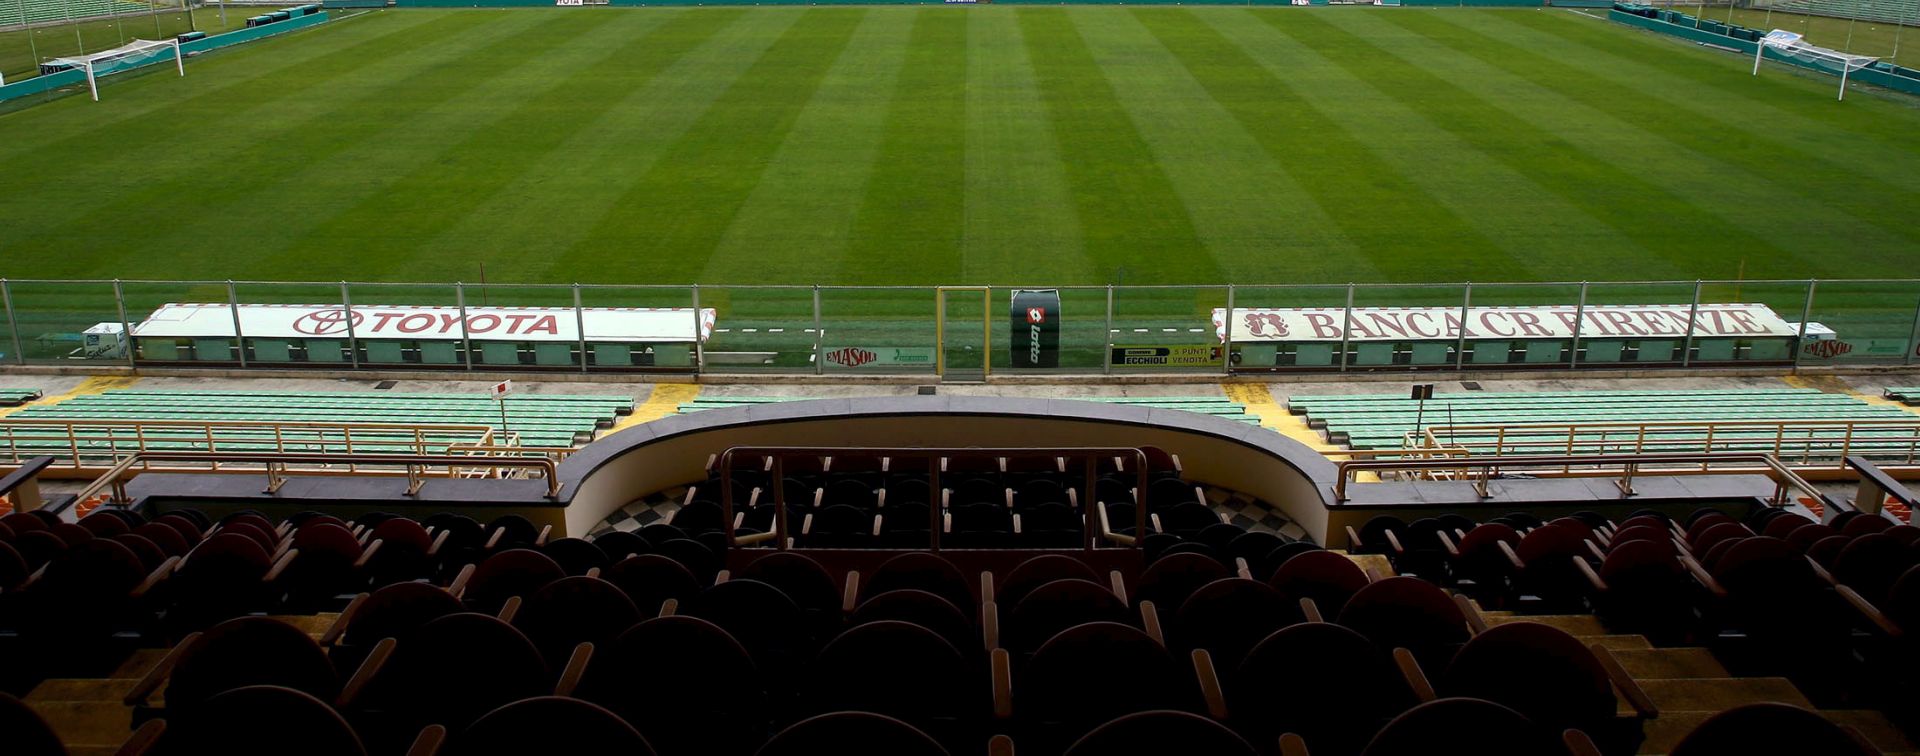 epa08370783 (FILE) -  An interior view of 'Artemio Franch' stadium in Florence, Tuscany Region, Italy, on Tuesday 06 February 2007 (reissued on 18 April 2020). According to Italian media reports the 'Artemio Franchi' in Florence could be one of the stadiums to host the rest of Serie A season if and when the Italian soccer league will get the green light to re-start after the suspension for the coronavirus COVID-19 pandemic.  EPA/CARLO FERRARO